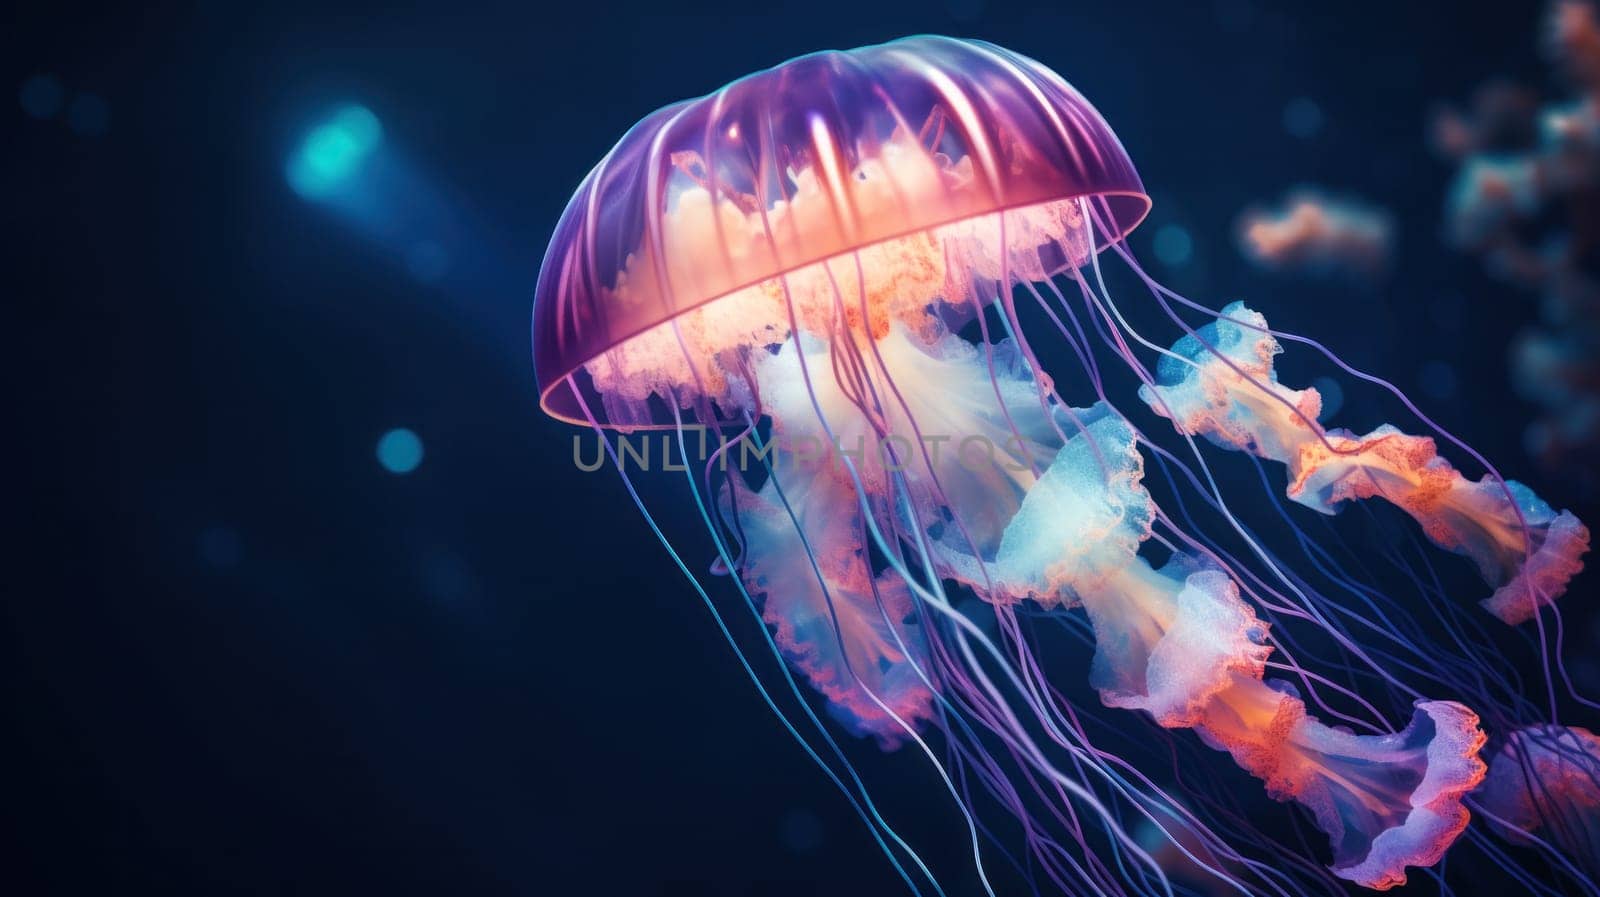 A jellyfish is floating in the water with its tentacles